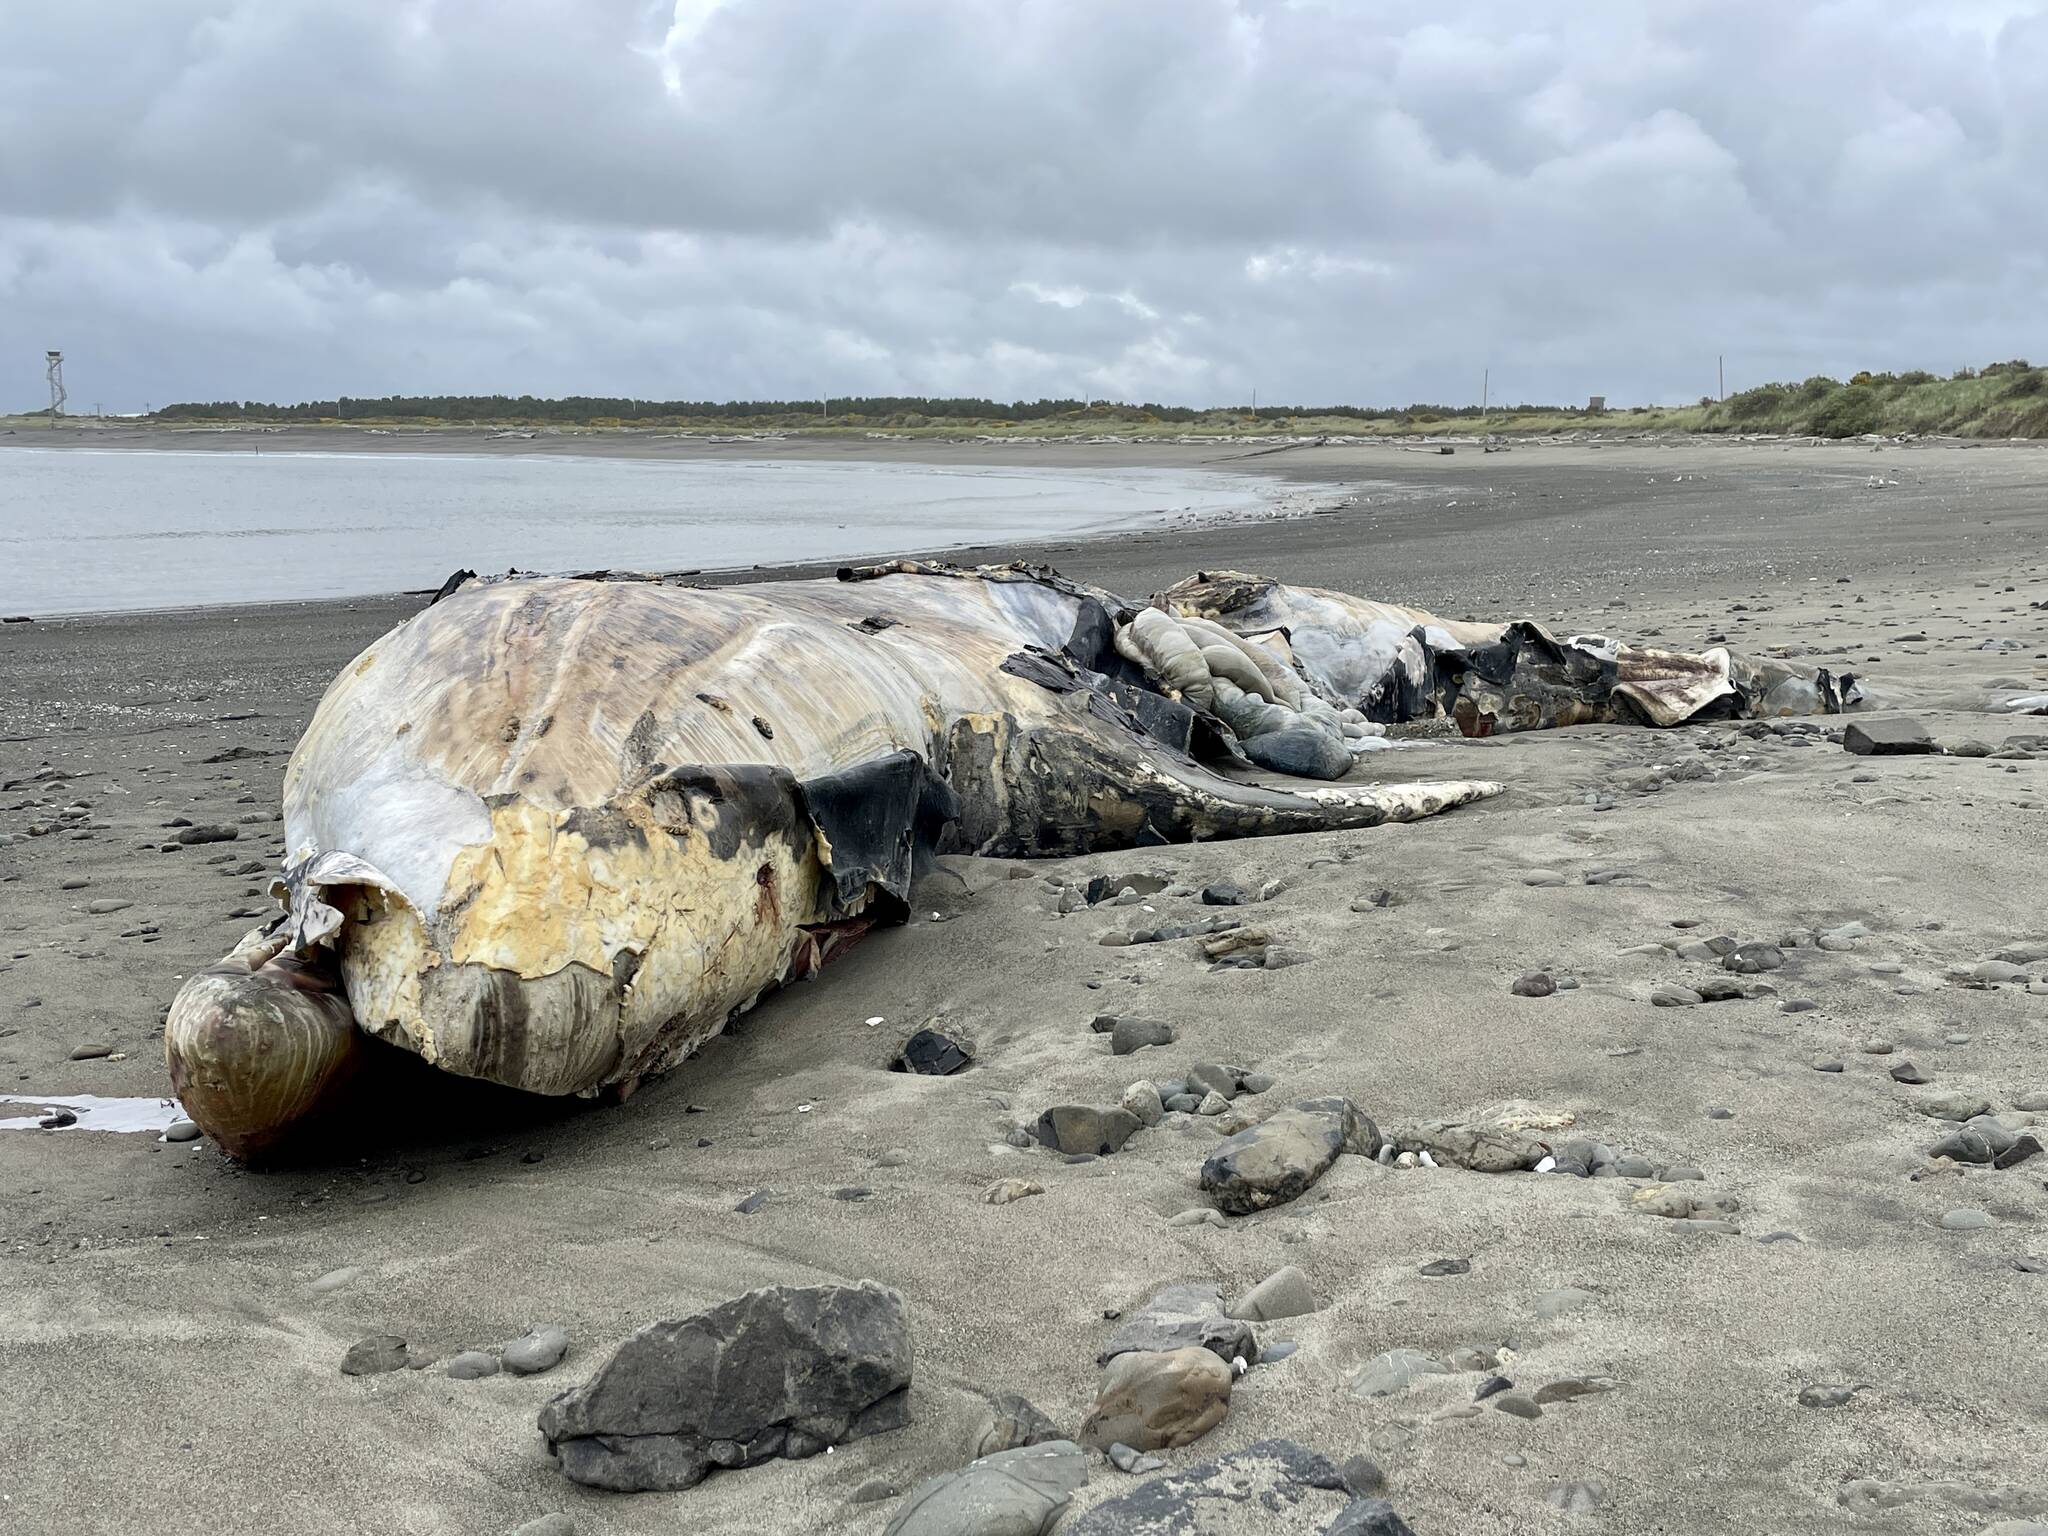 A gray whale carcass that washed ashore in a state park in Westport will remain there, said a spokesperson for Washington State Parks. (Michael S. Lockett / The Daily World)